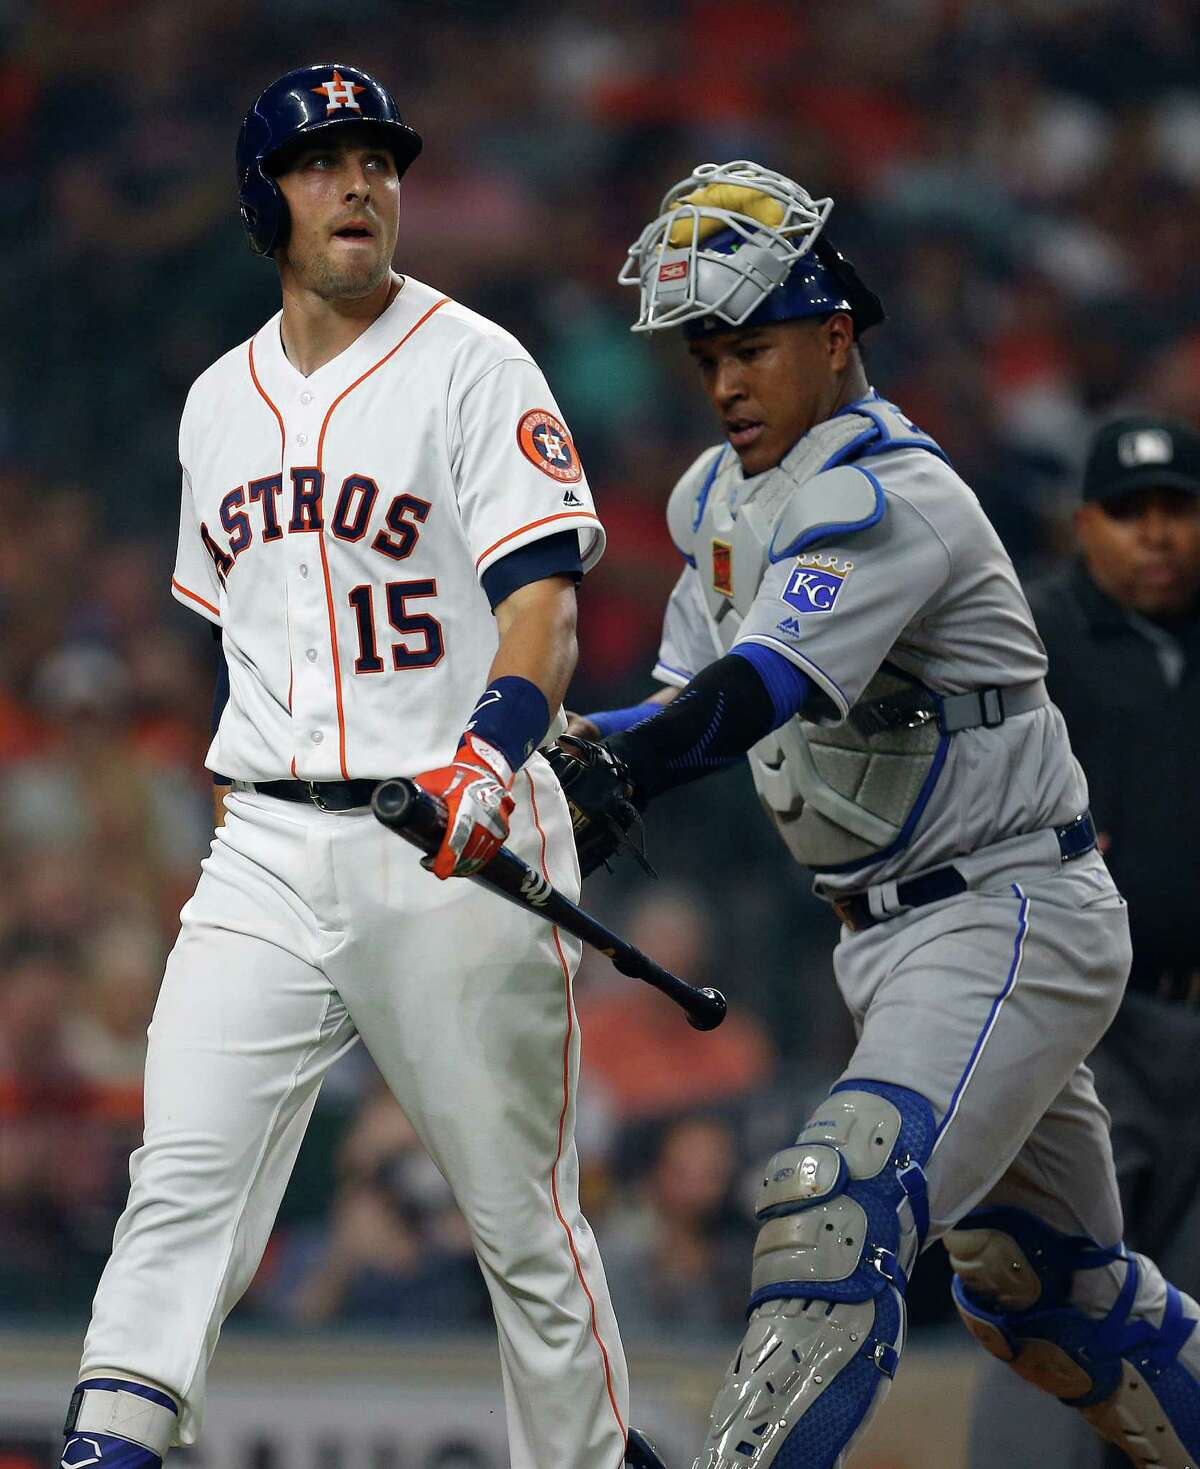 Houston Astros catcher Jason Castro (15) is tagged by Kansas City Royals catcher Salvador Perez (13) after he struck out during the second inning of an MLB game at Minute Maid Park, Monday, April 11, 2016, in Houston.